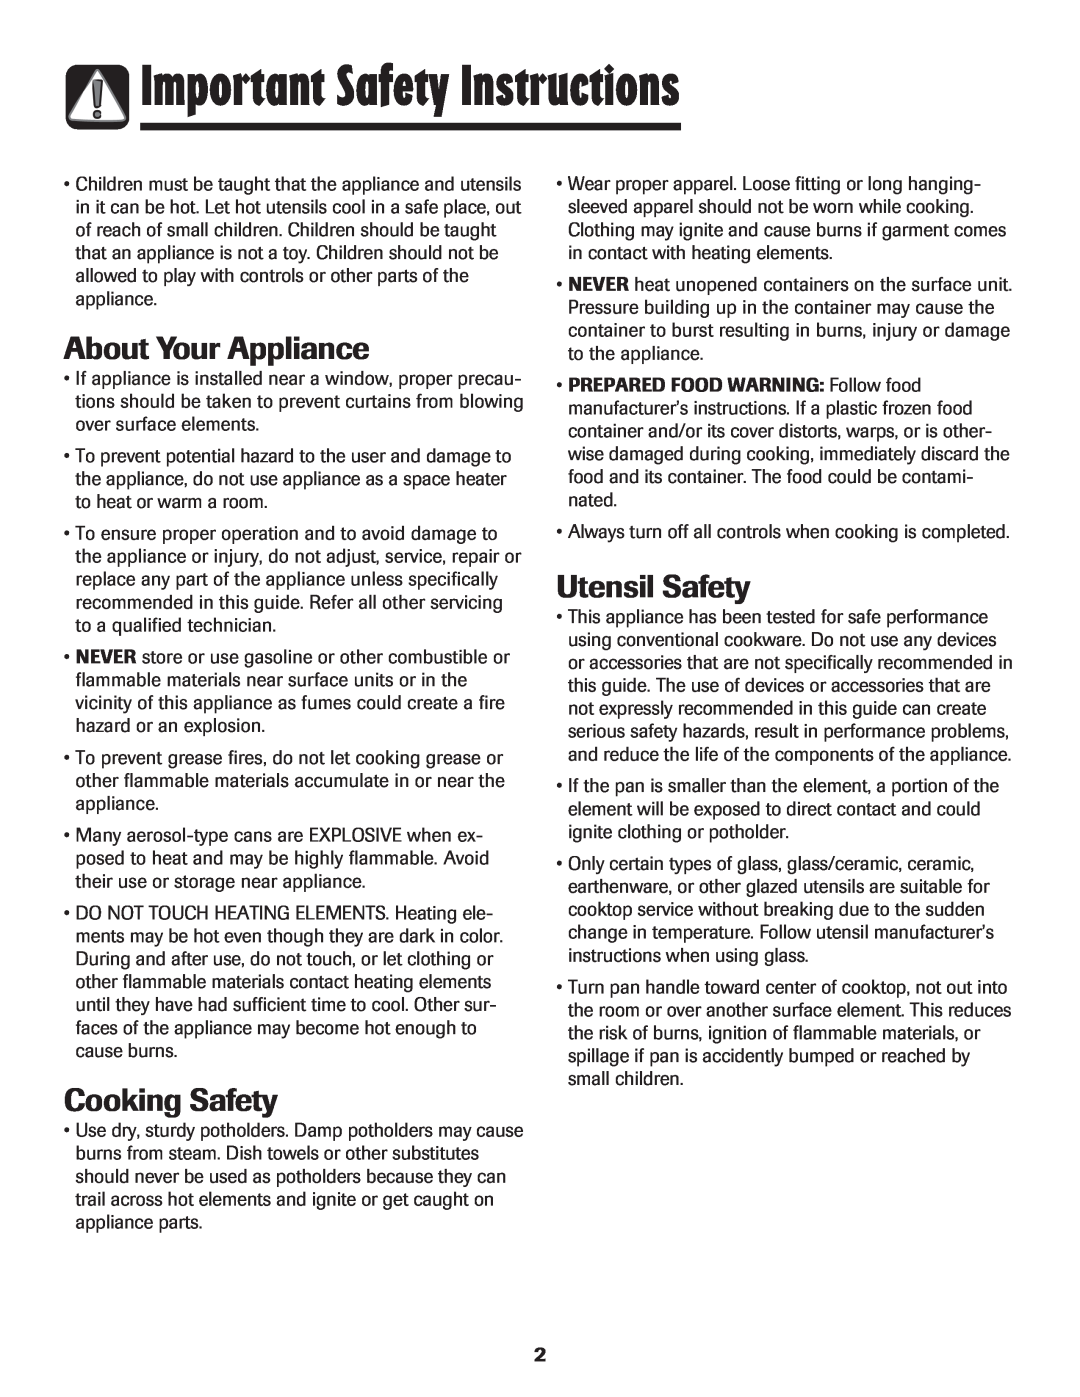 Maytag MEC4430AAW Important Safety Instructions, About Your Appliance, Cooking Safety, Utensil Safety 